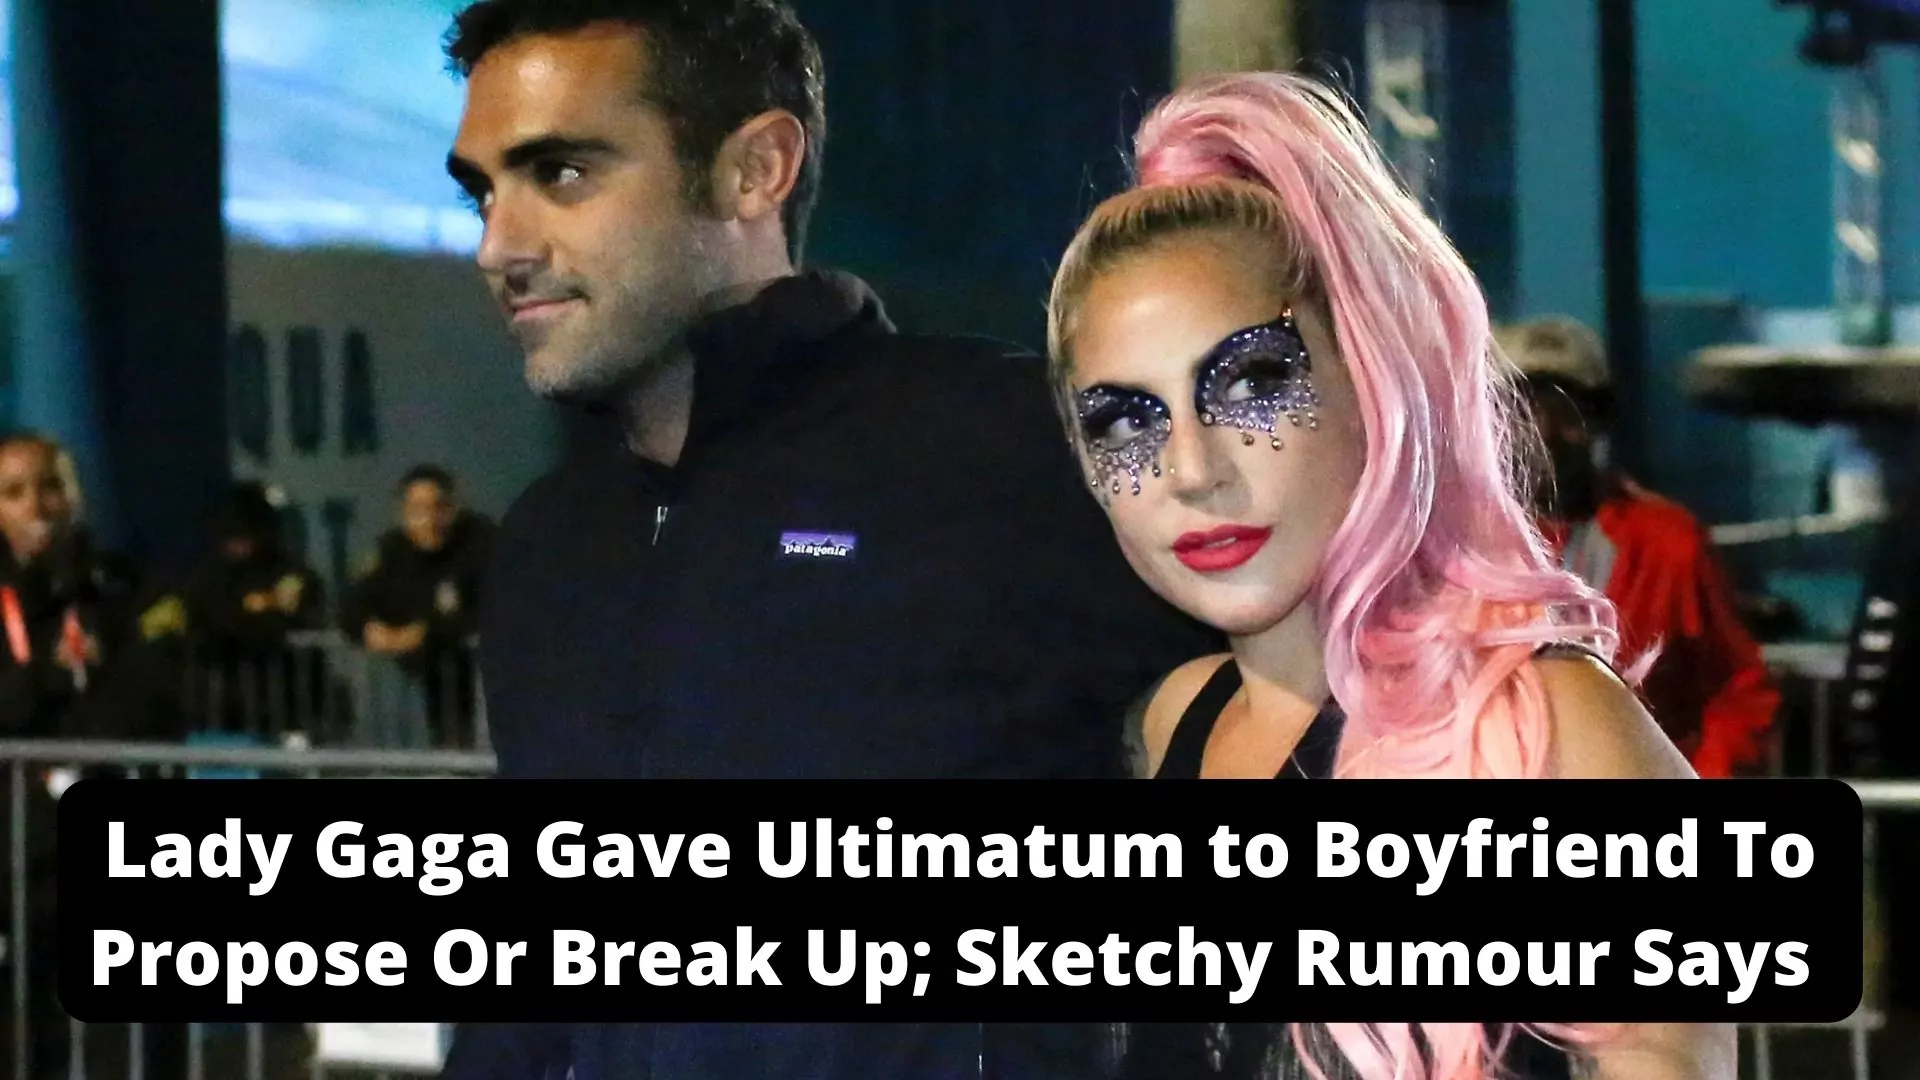 Lady Gaga Gave Ultimatum to Boyfriend To Propose Or Break Up; Sketchy Rumour Says 